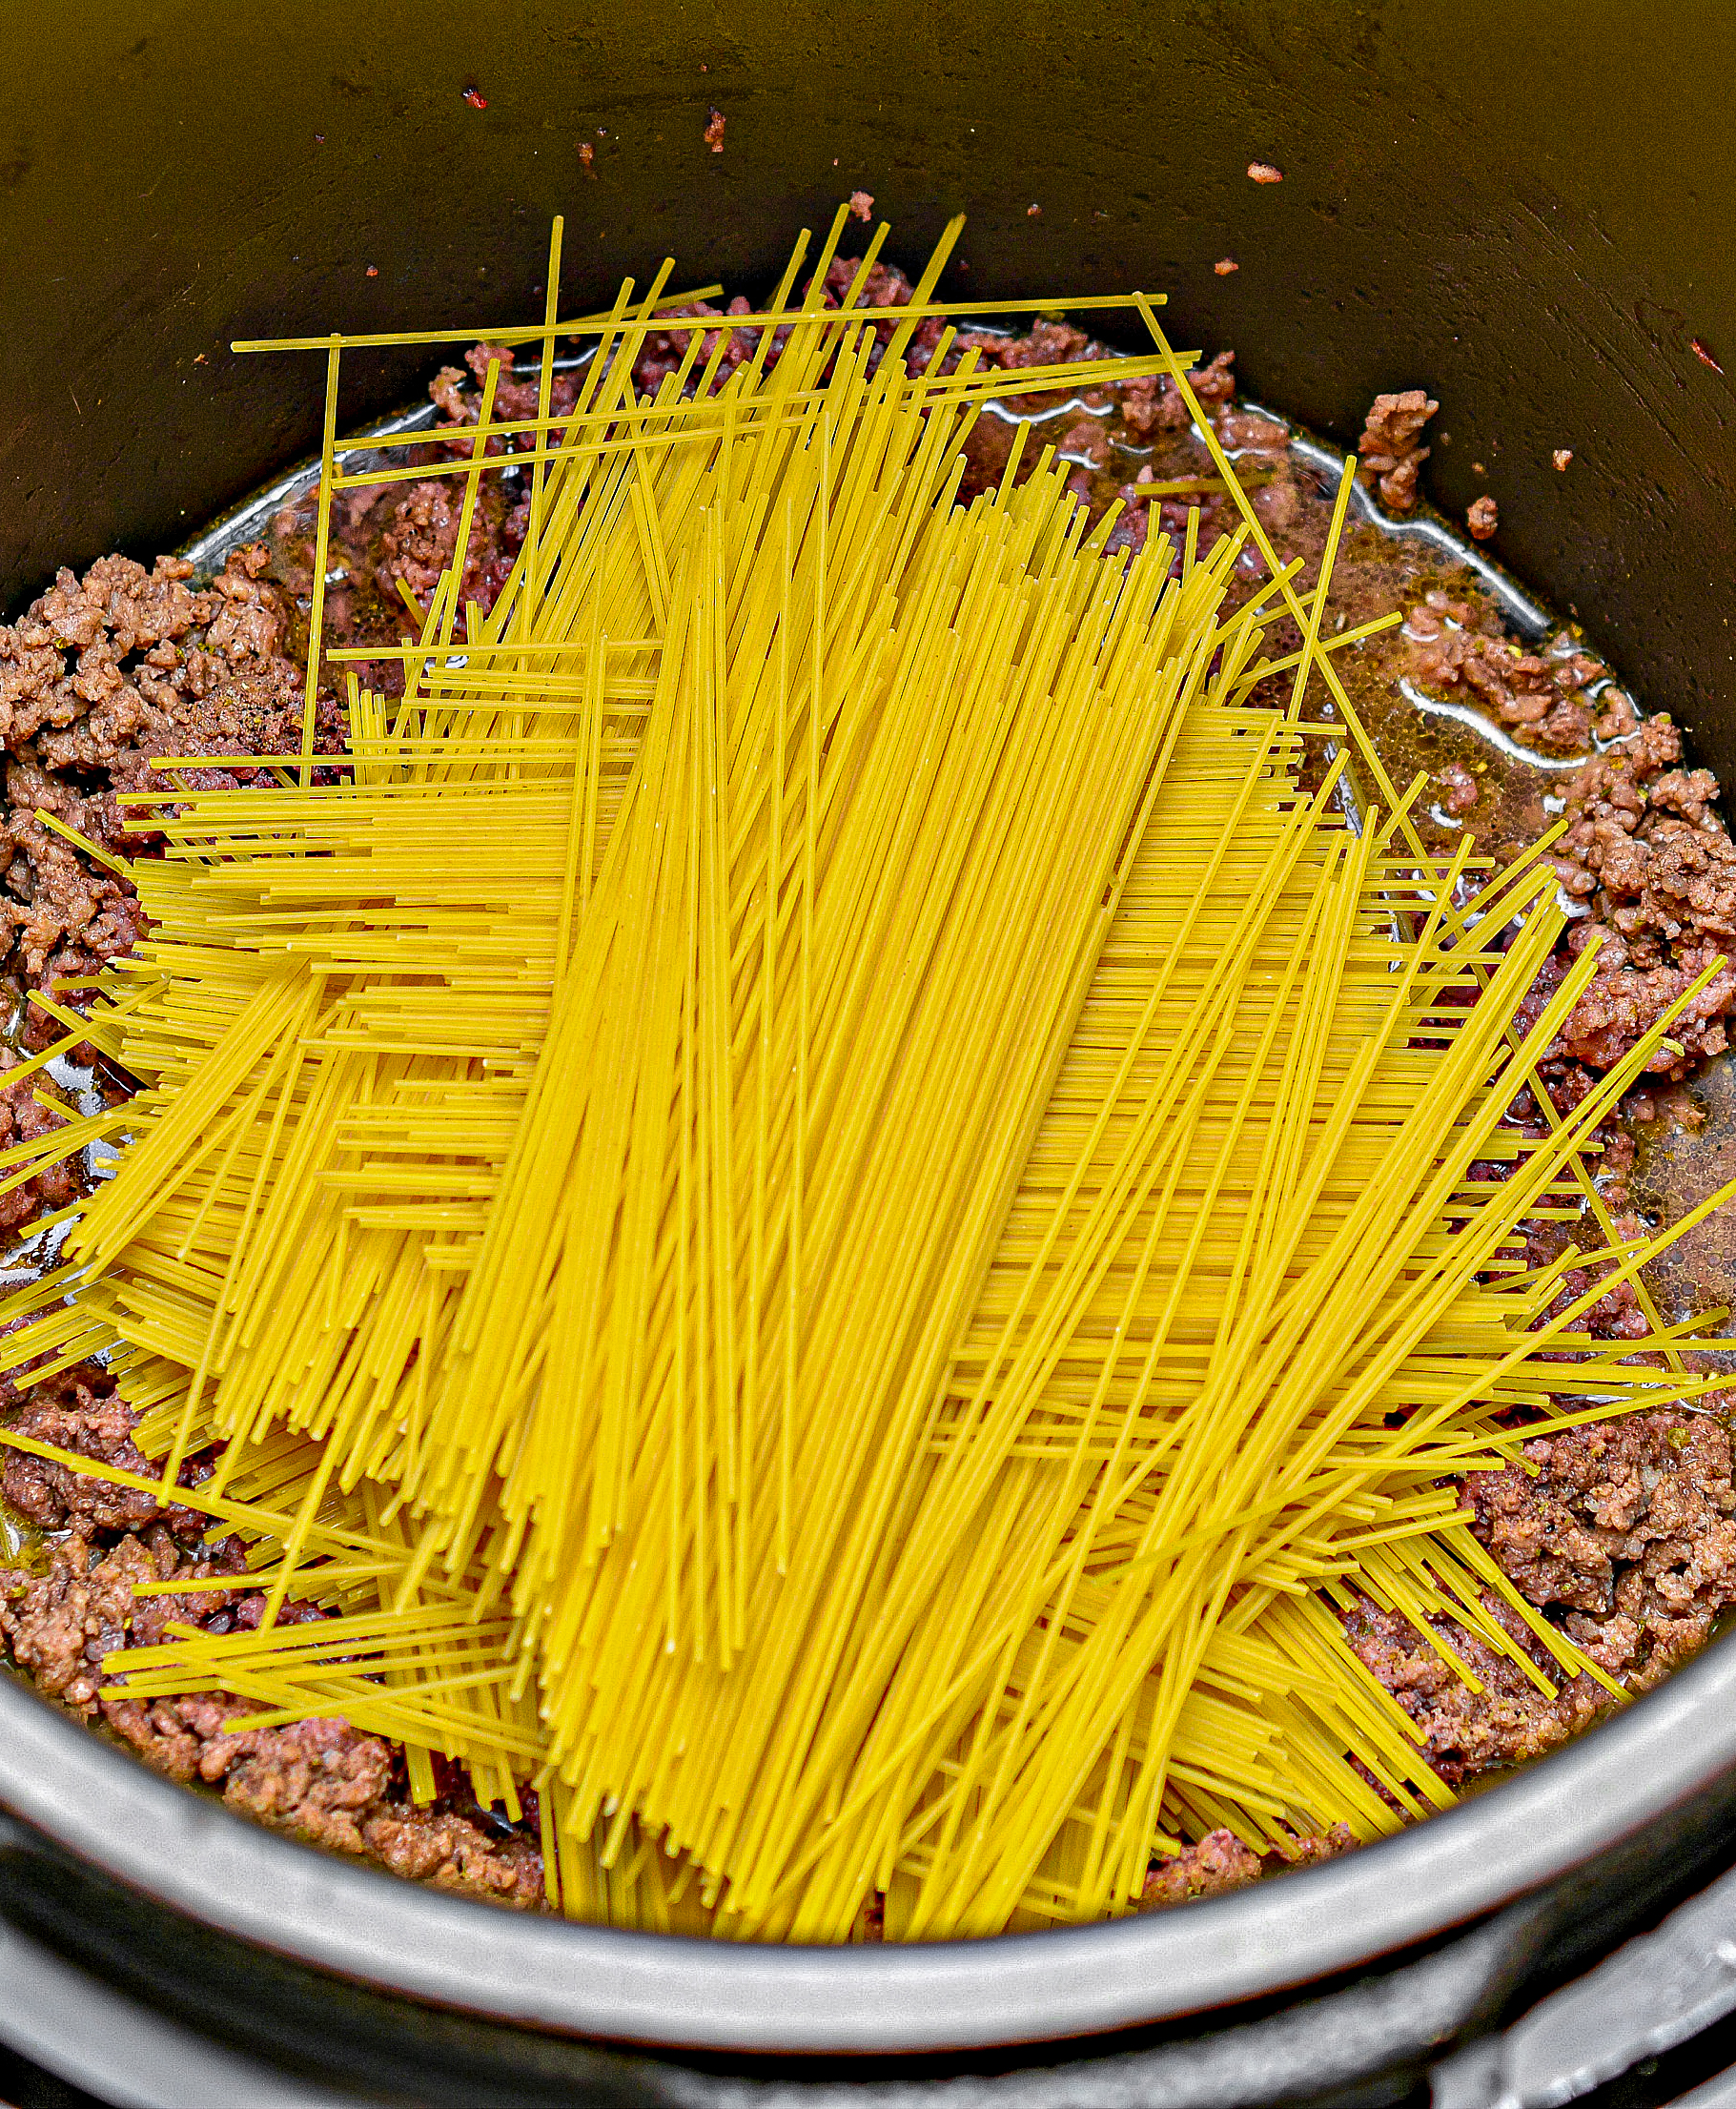 Break the spaghetti noodles in half, and layer them a little at a time on top of the meat mixture in the Instant Pot, layering the noodles in slightly different directions each time.